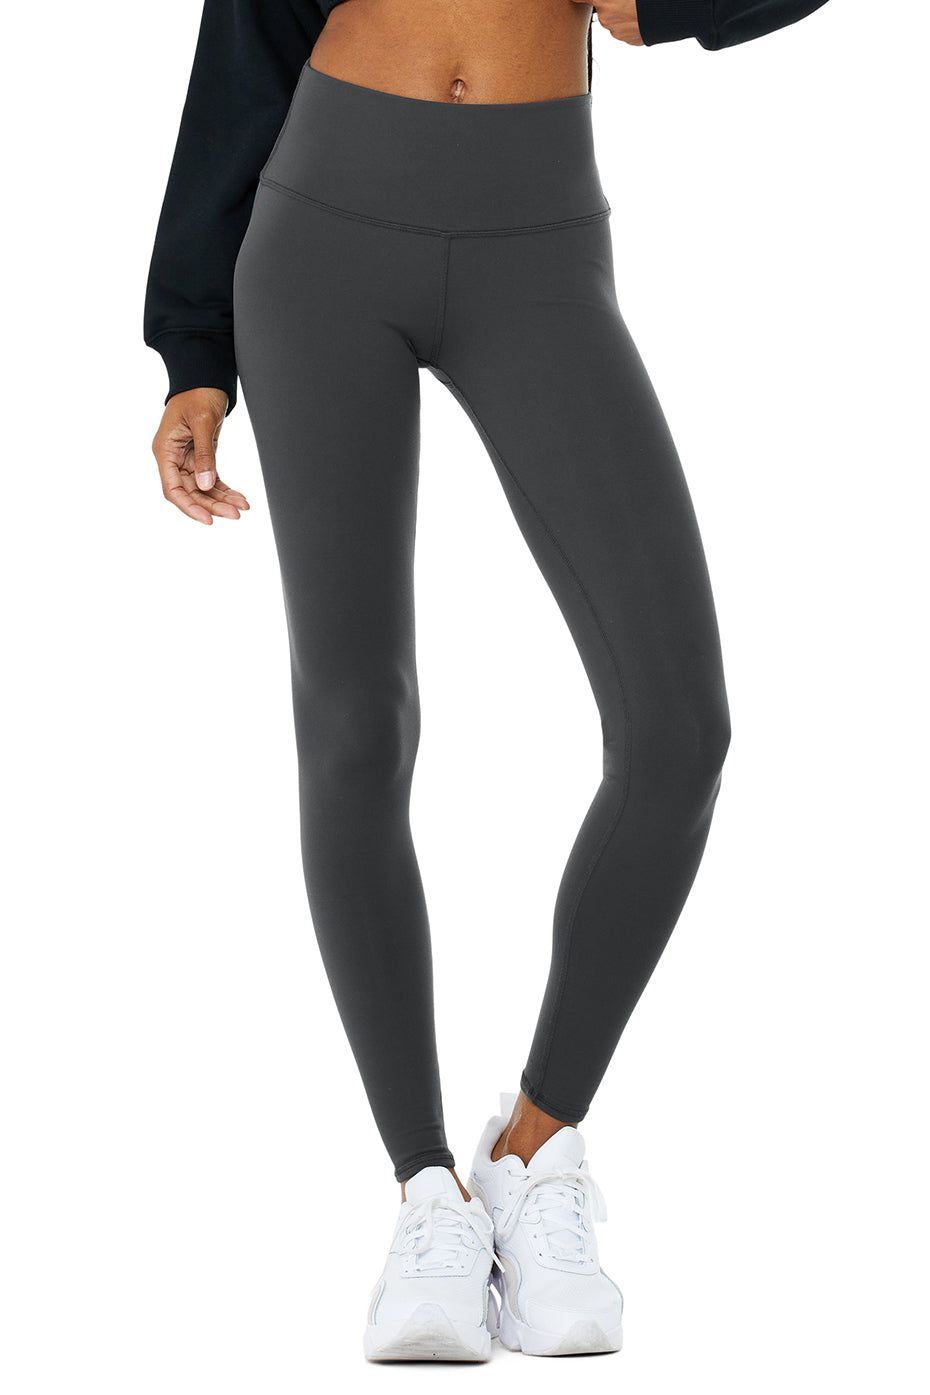 Amazon's Best-Selling Fleece-Lined Tights Are a Winter Style Staple